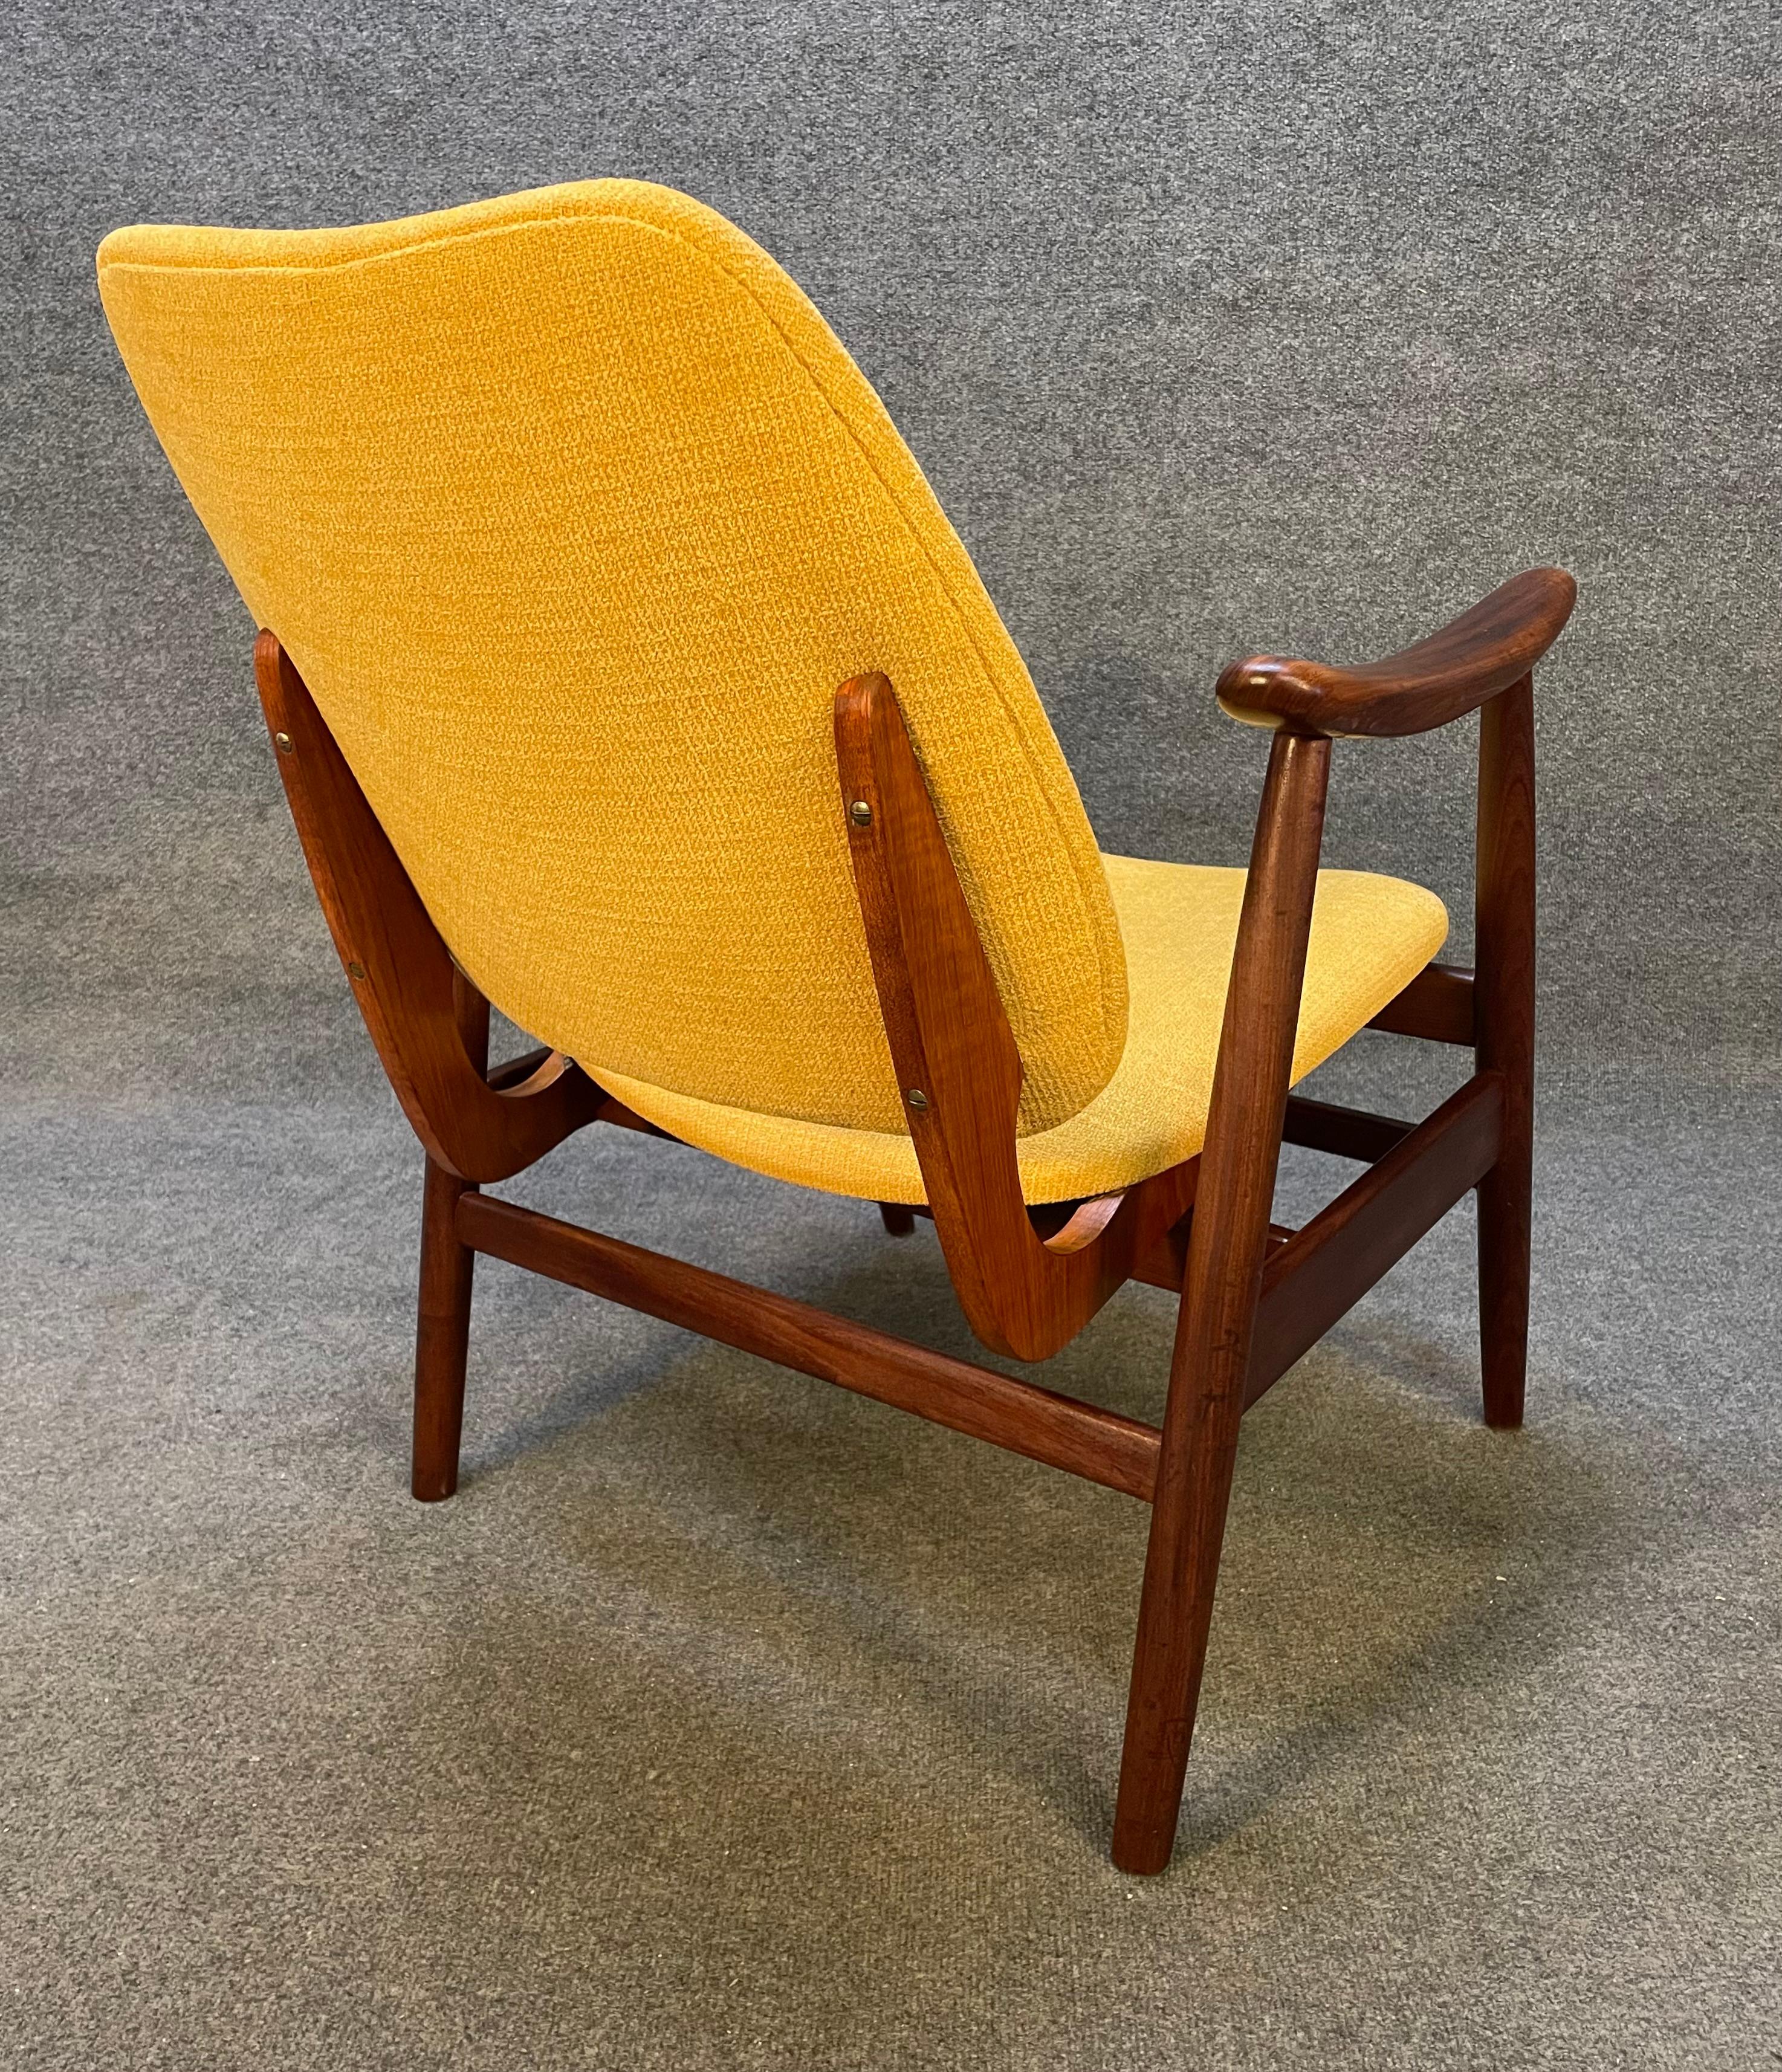 Vintage Danish Mid Century Modern Teak Lounge Chair In Good Condition For Sale In San Marcos, CA